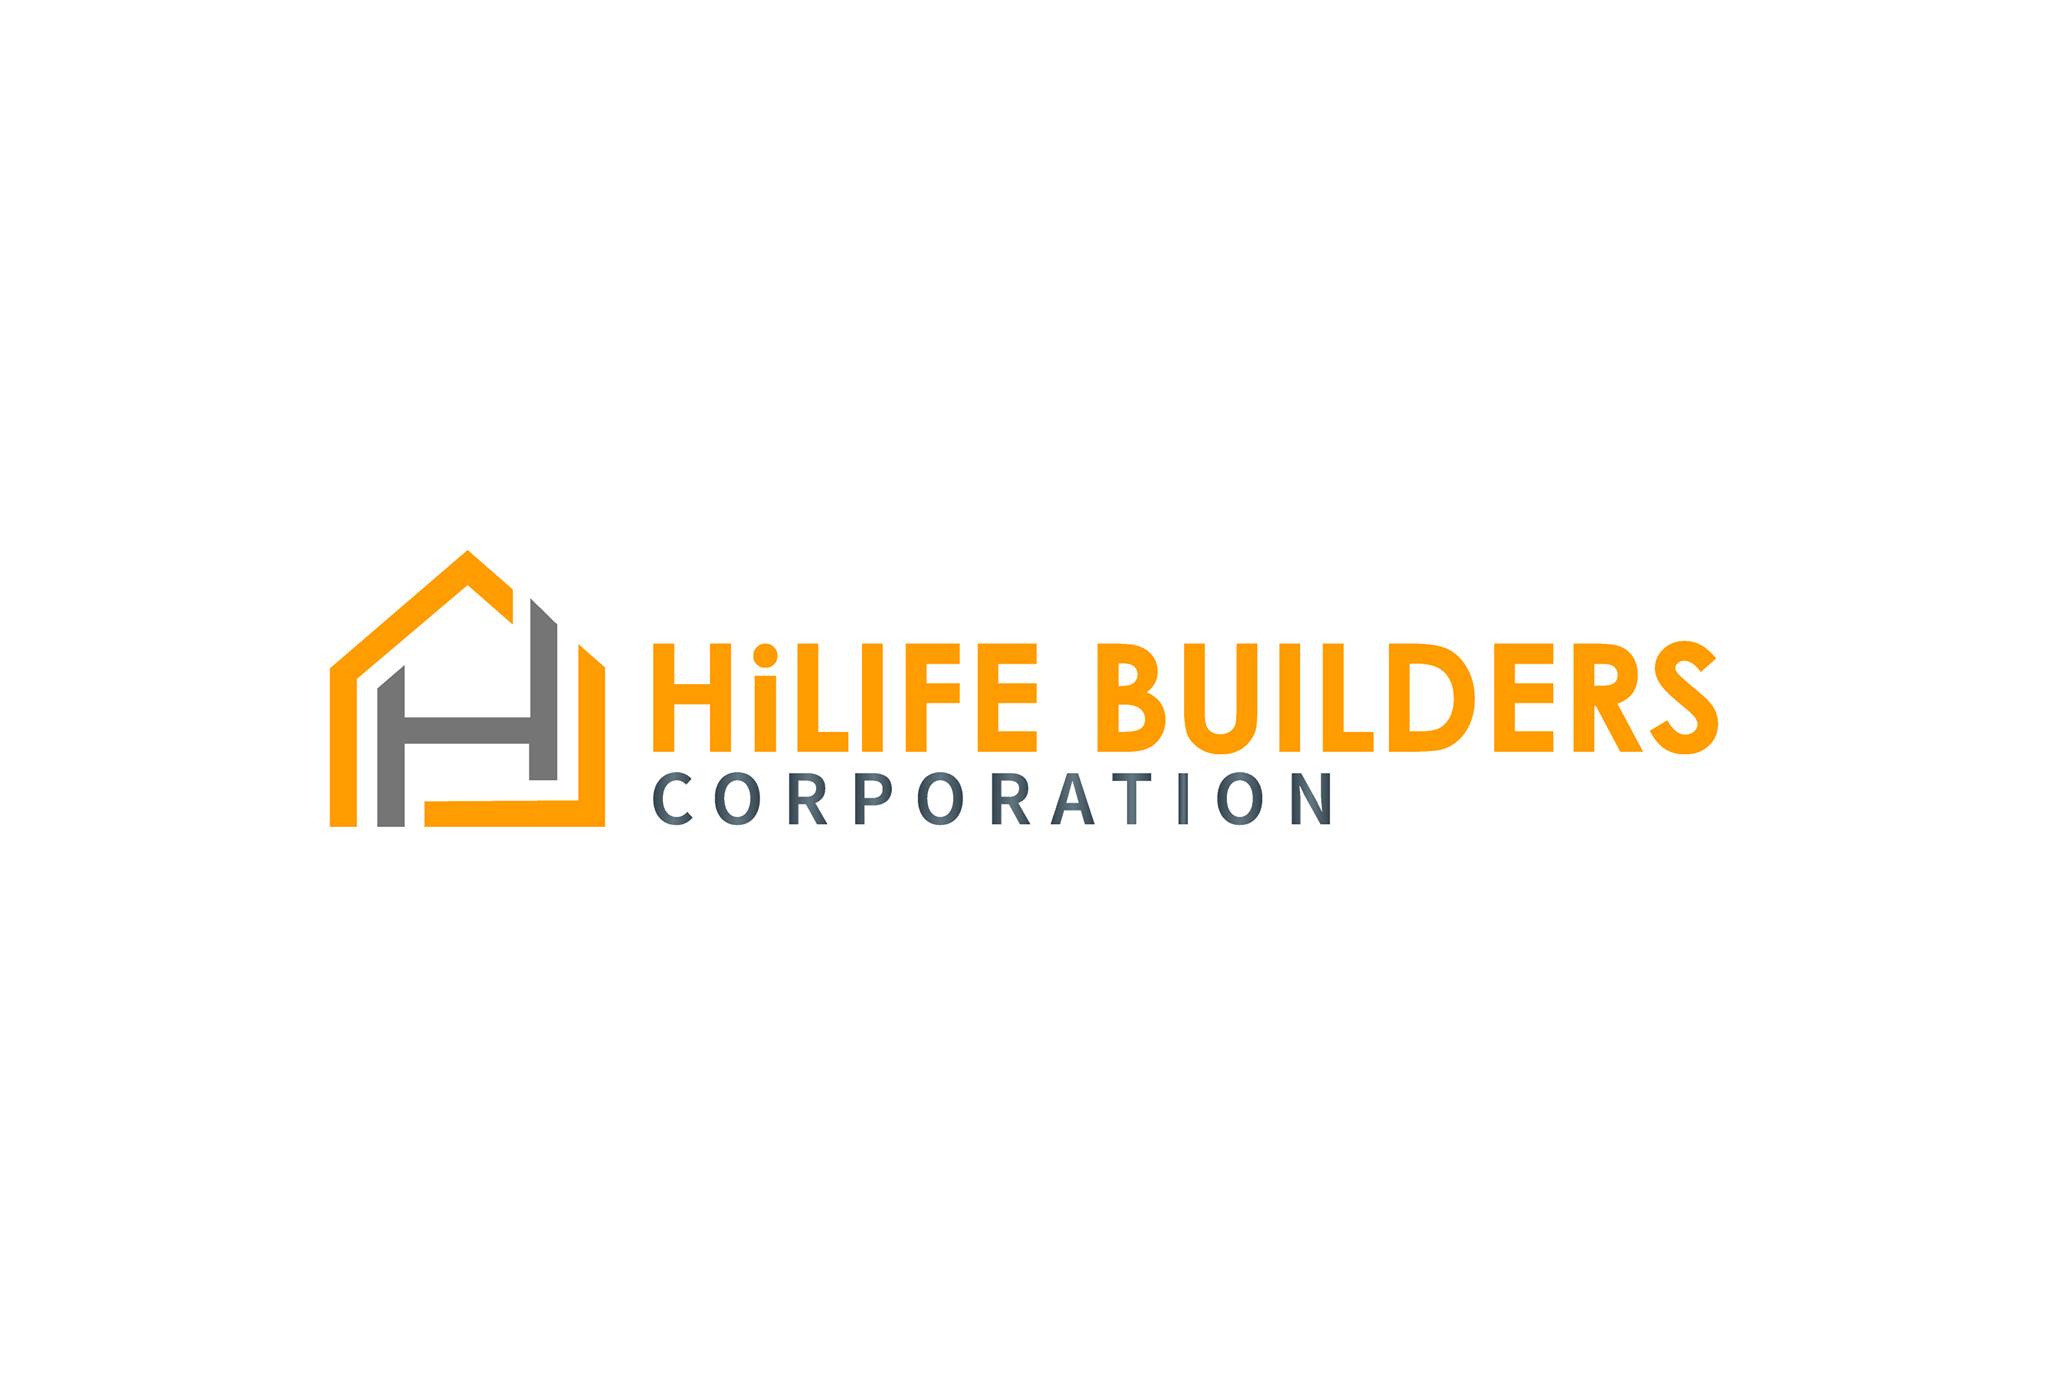 HiLife Builders Corporation